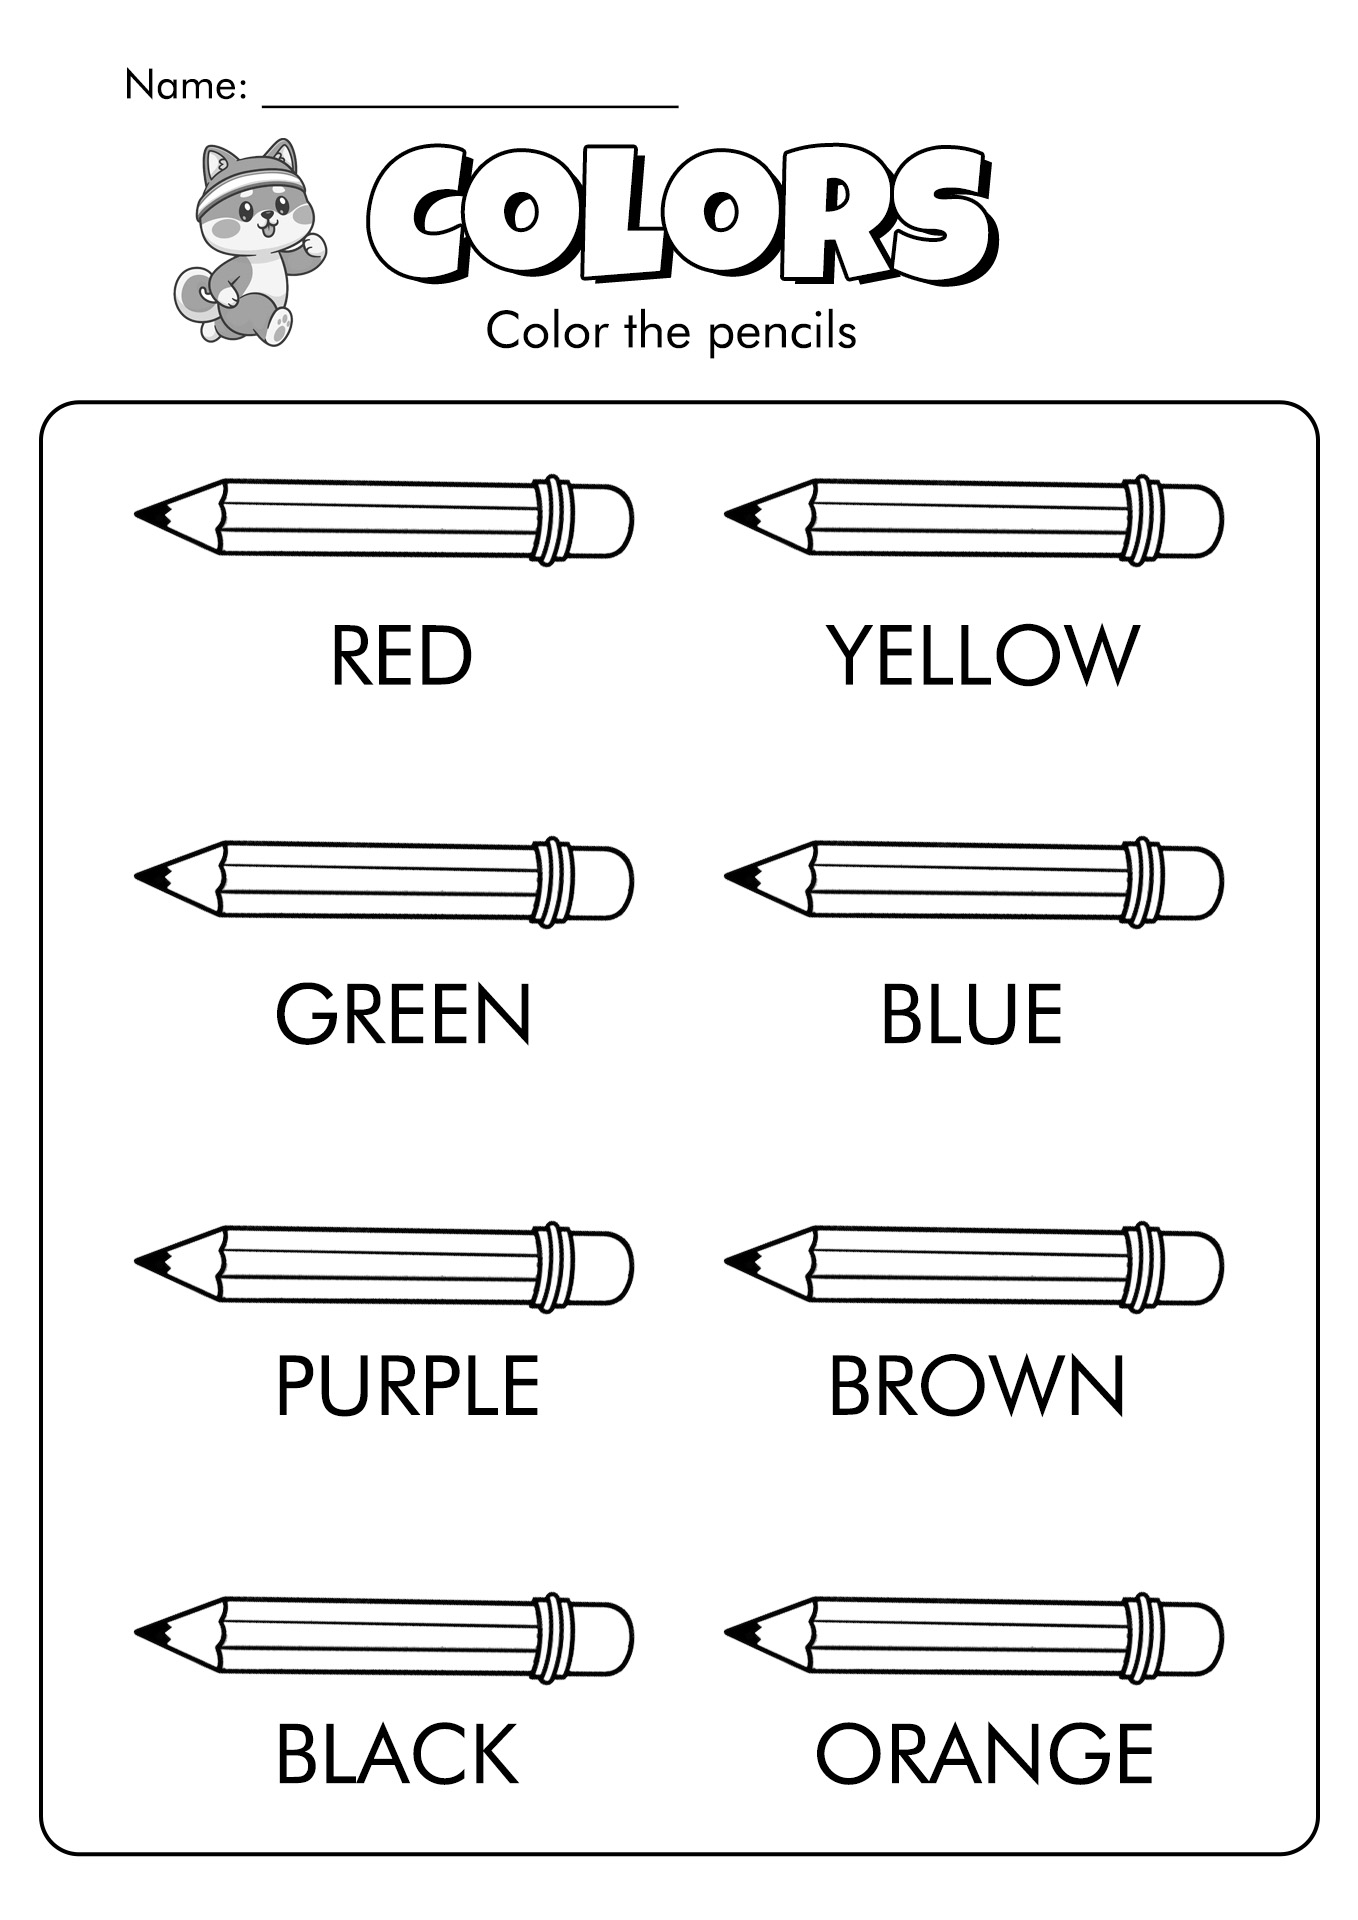 12-best-images-of-english-colors-worksheet-colors-coloring-worksheets-coloring-worksheets-for